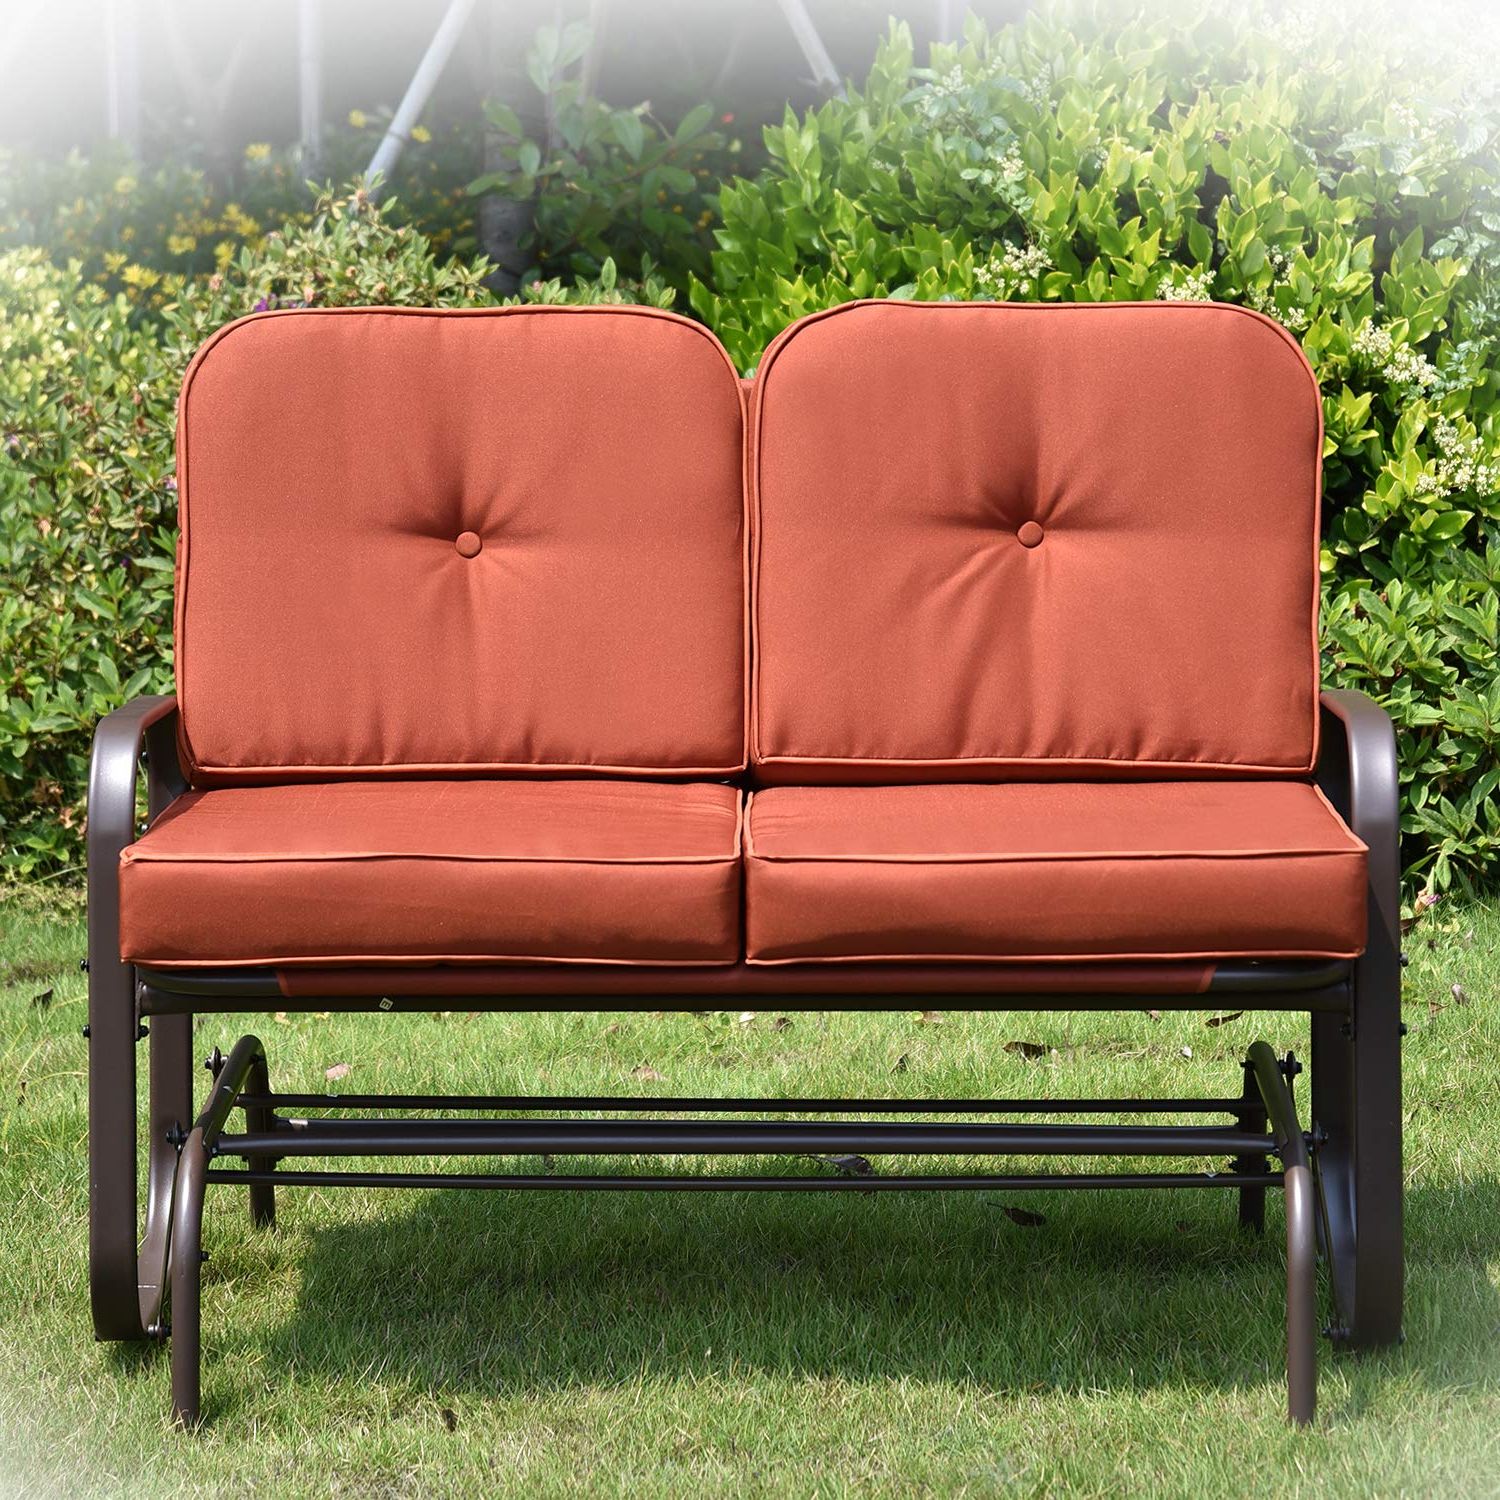 Amazon: Broad Patio Glider Bench Loveseat With Removable In Well Liked Loveseat Glider Benches With Cushions (View 1 of 30)